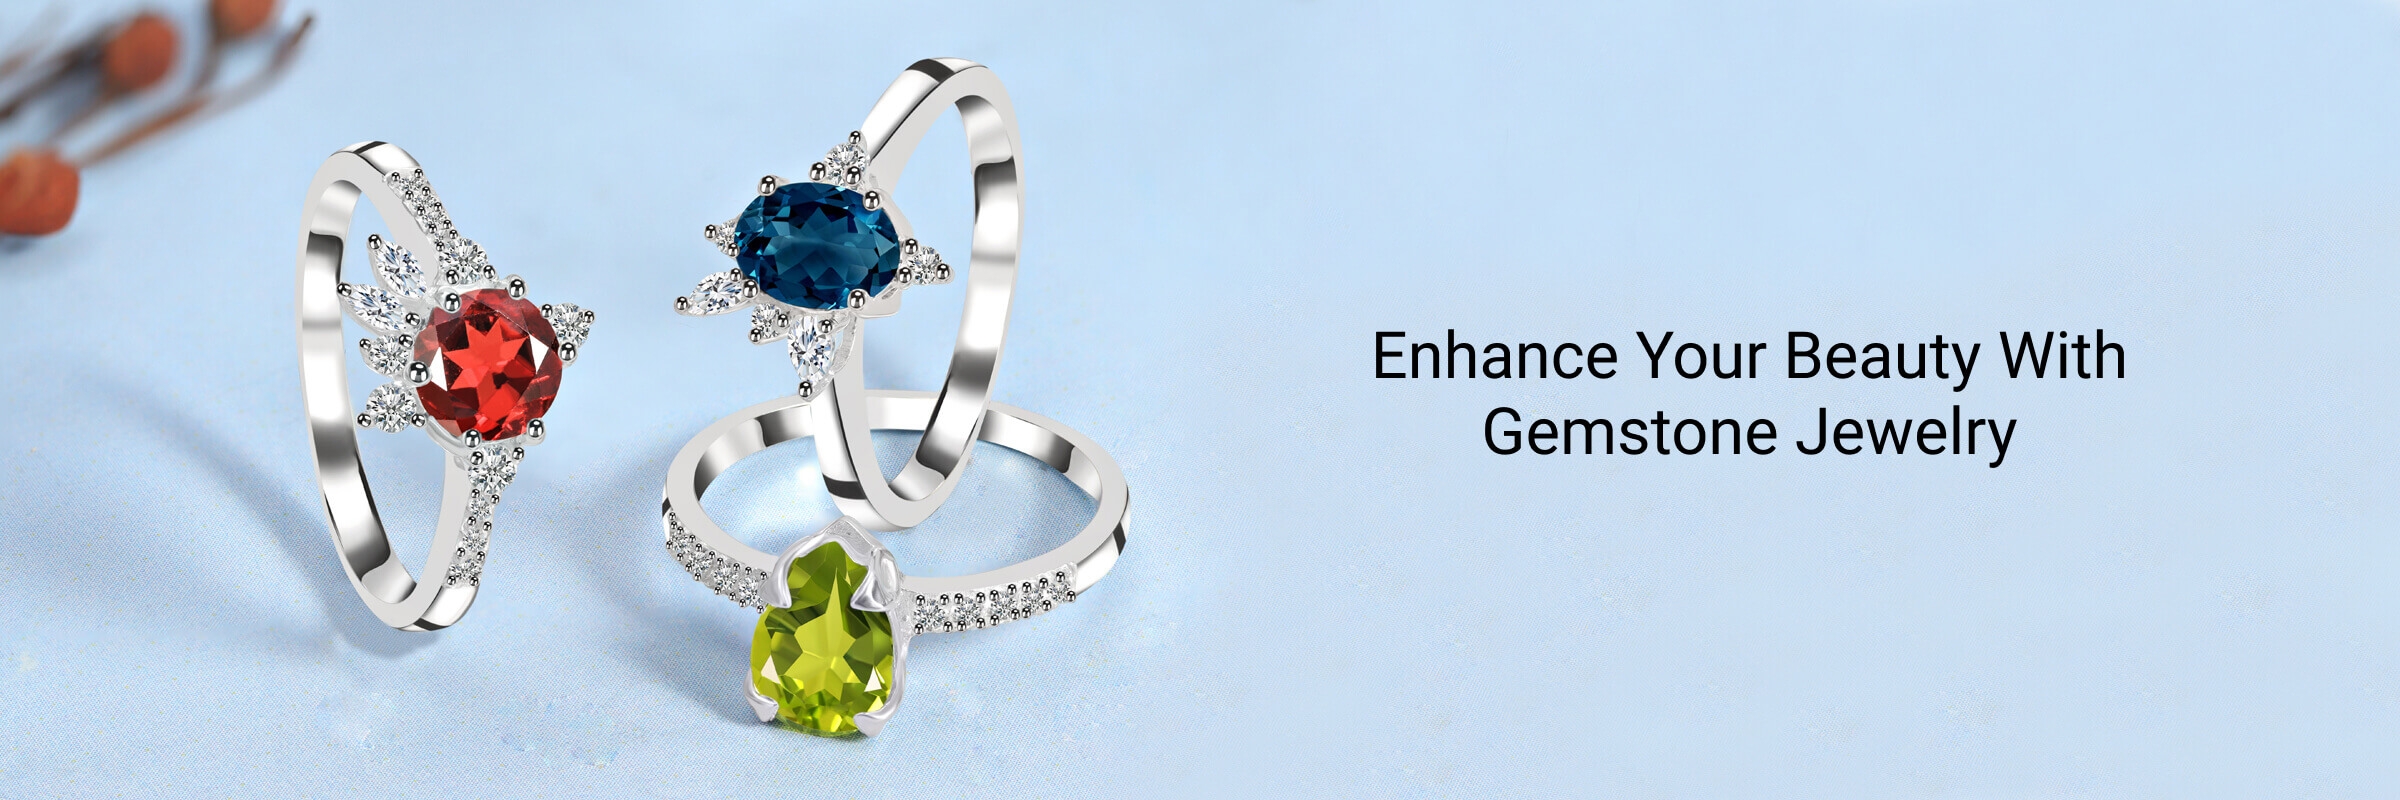 Enhance Your Beauty with Gemstone Jewelry 